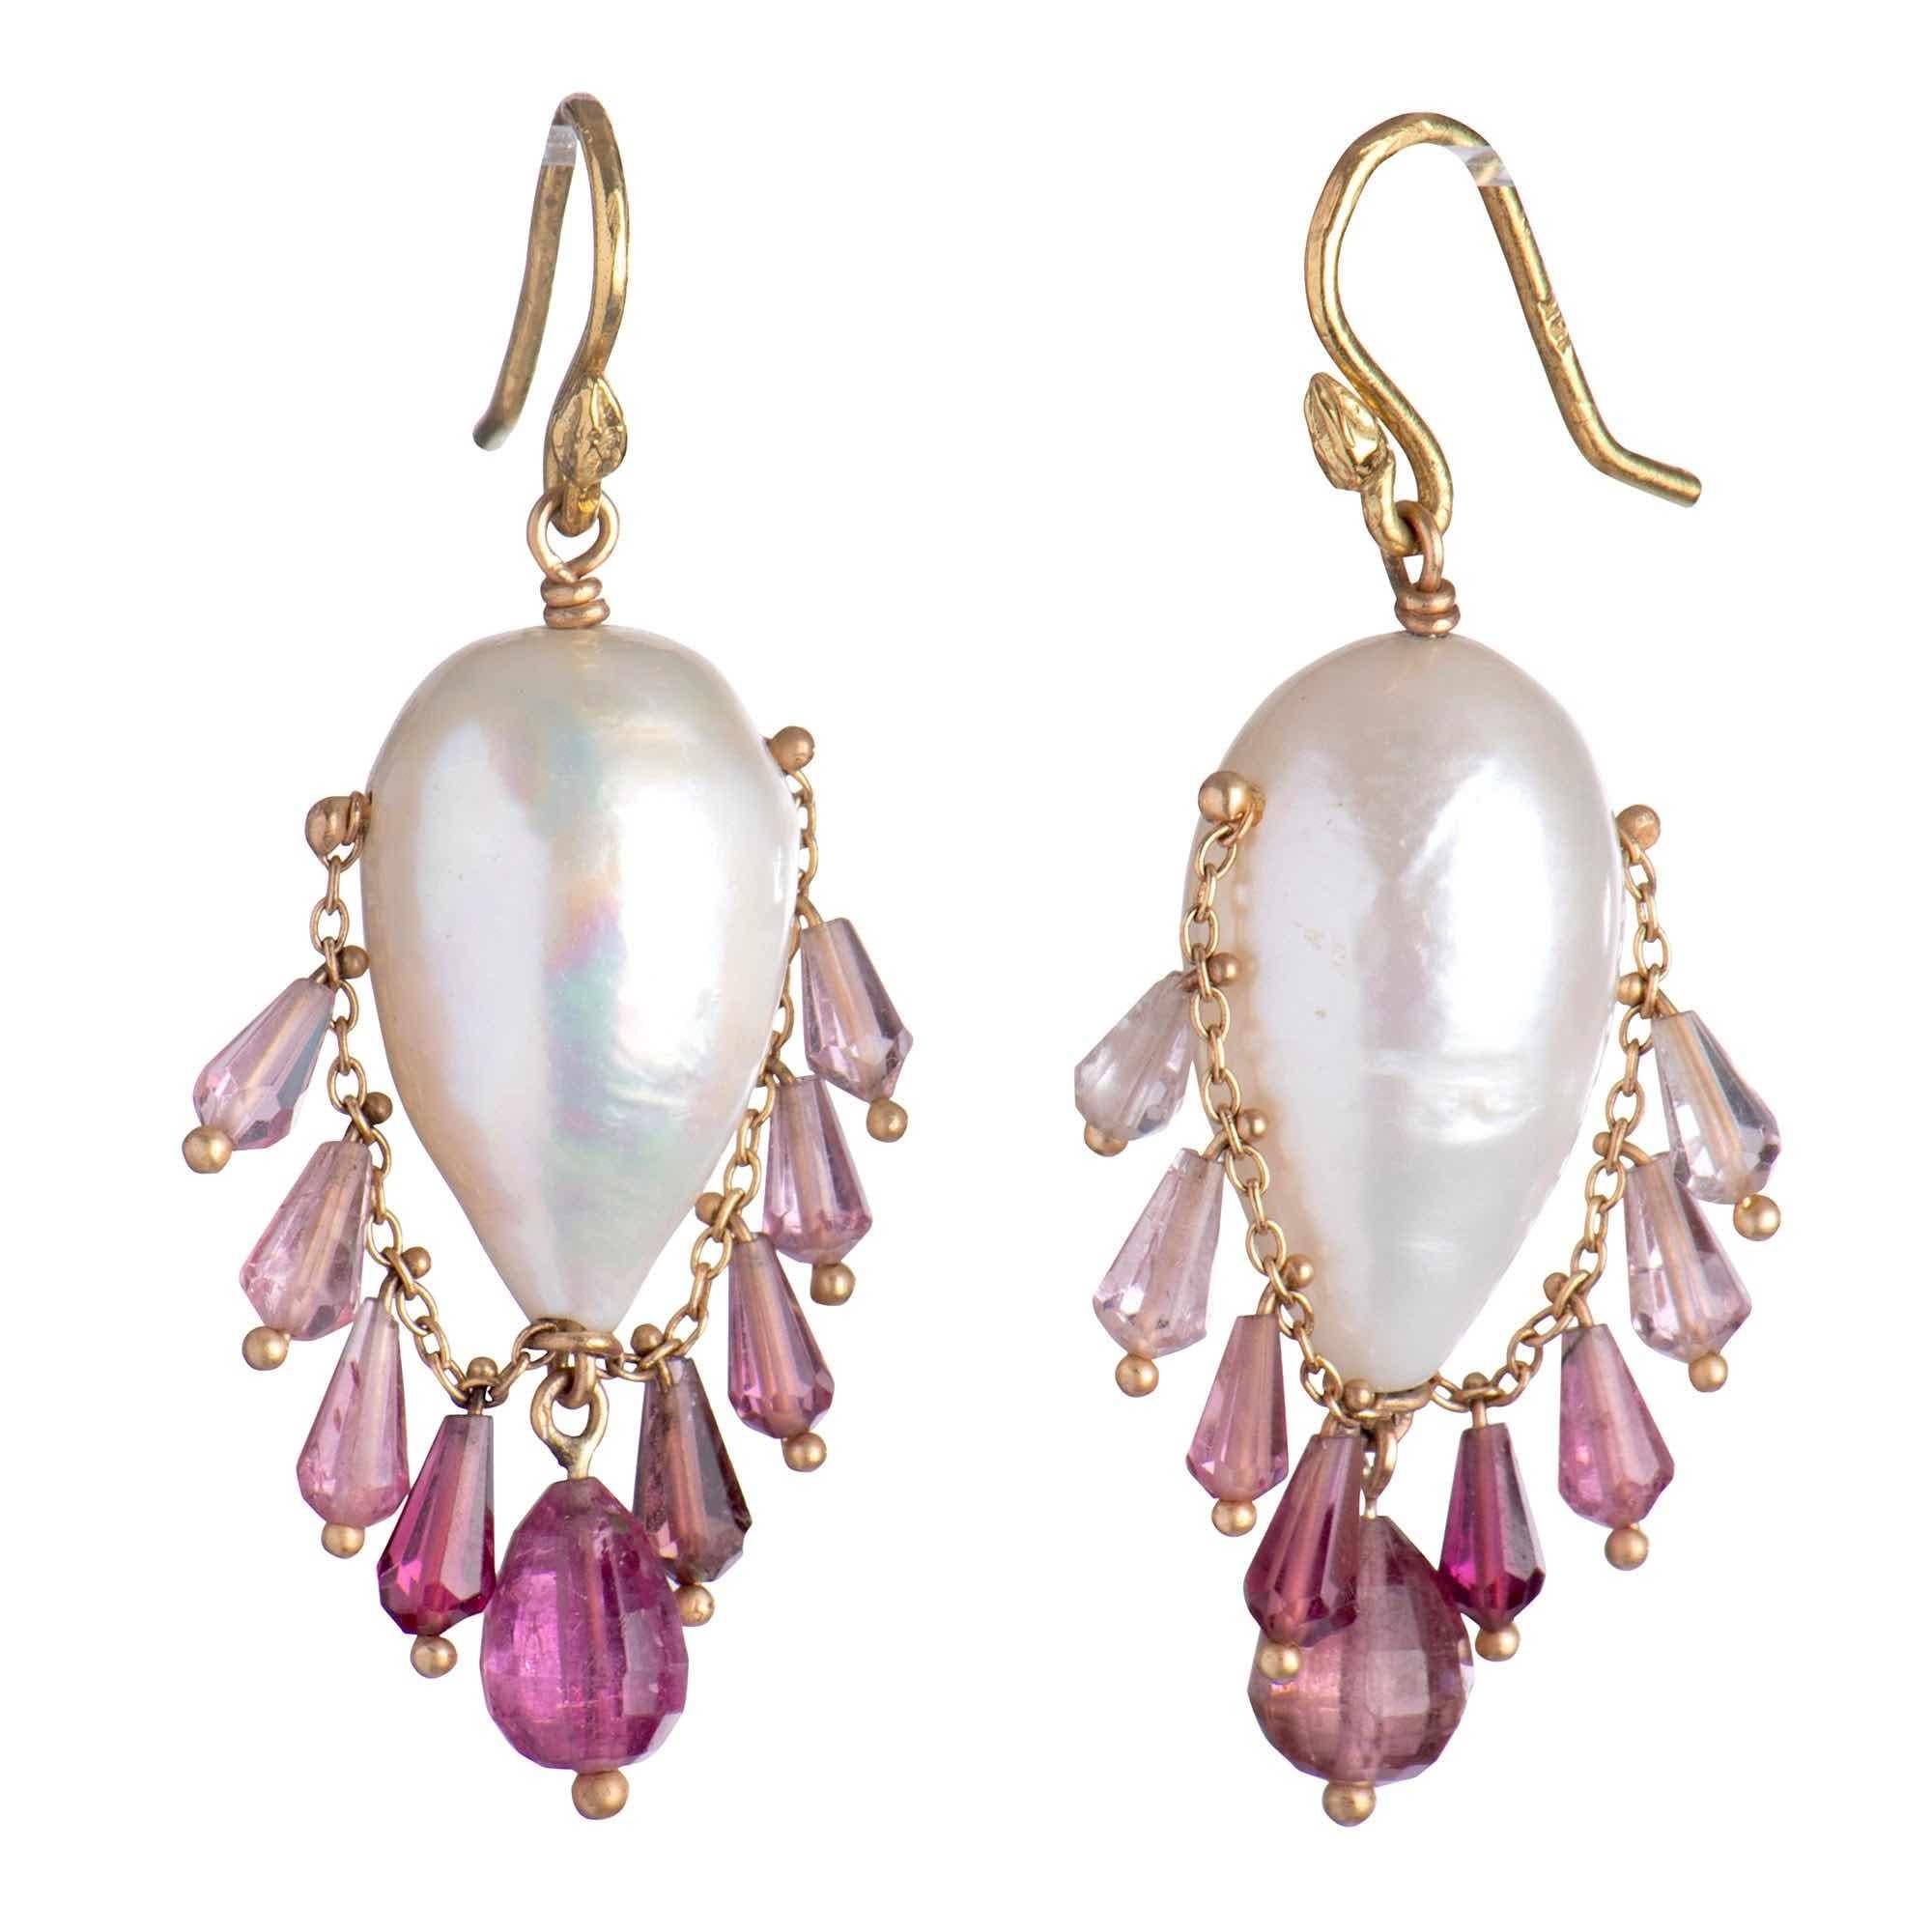 Artisan Gabrielle Sanchez South Sea Pearl and Ombre Pink Tourmaline 18k Fringe Earring